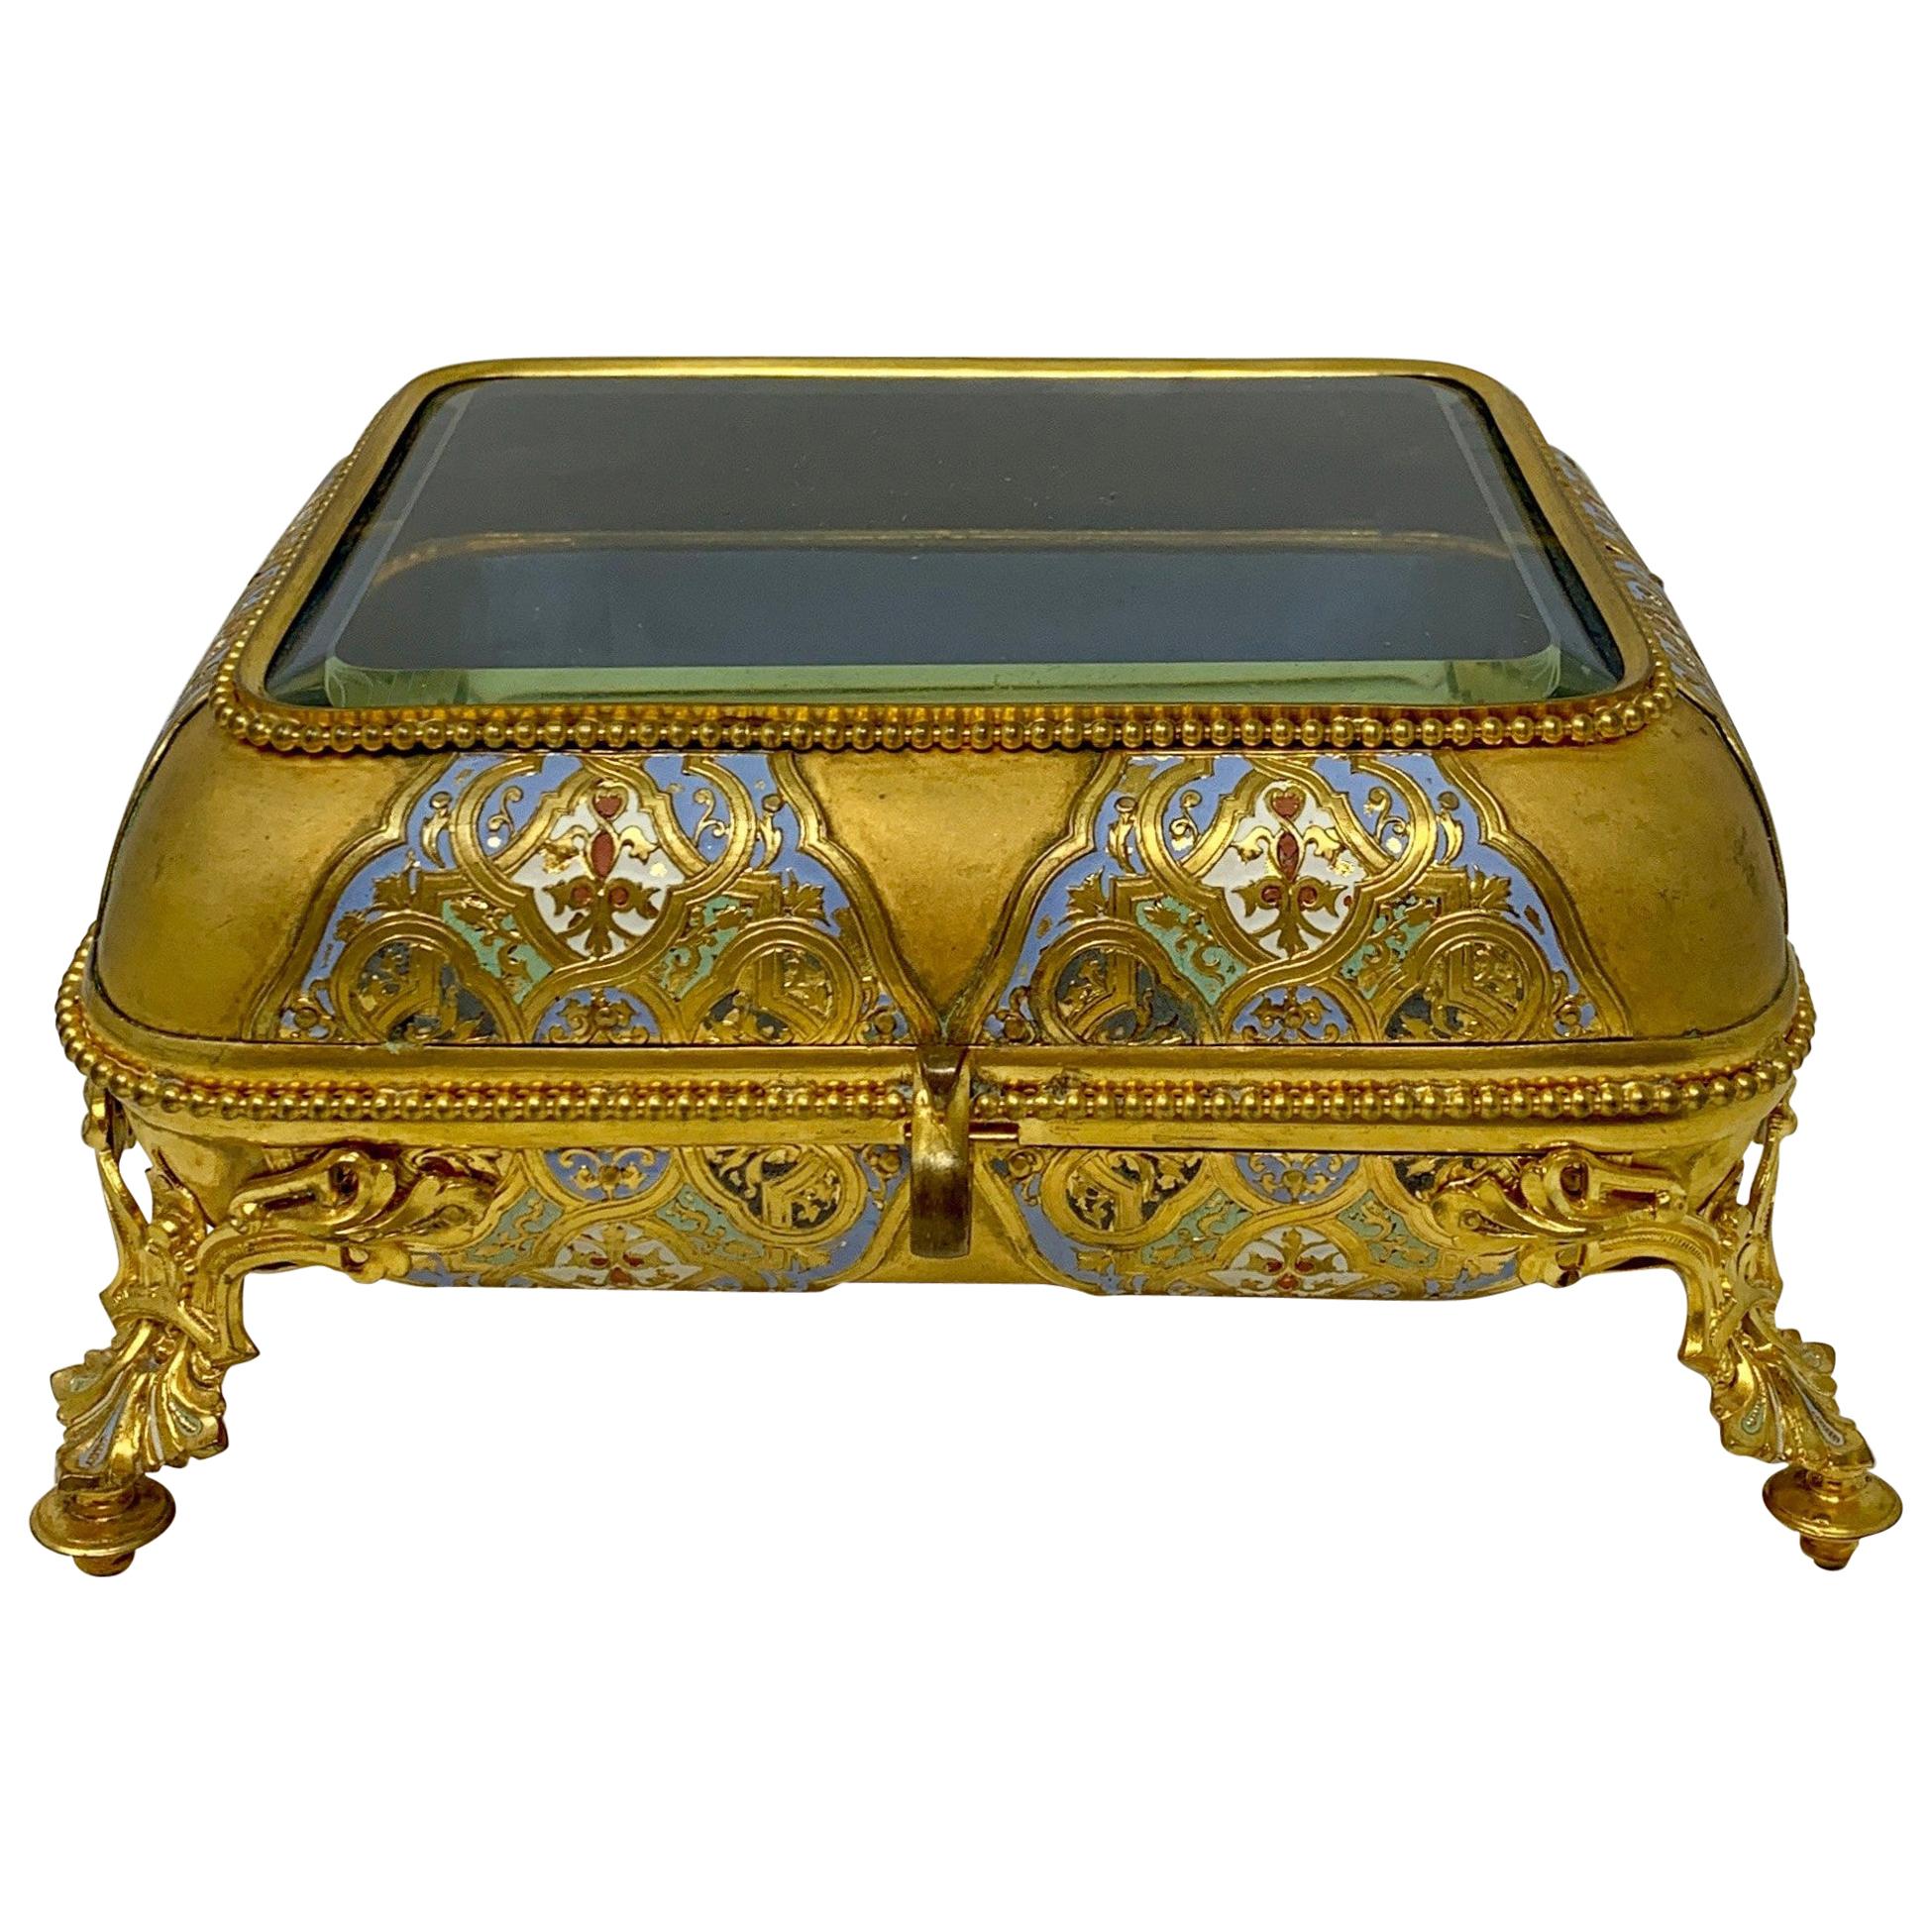 Antique French Napoleon III Ormolu and Cloisonné Jewel Box For Sale